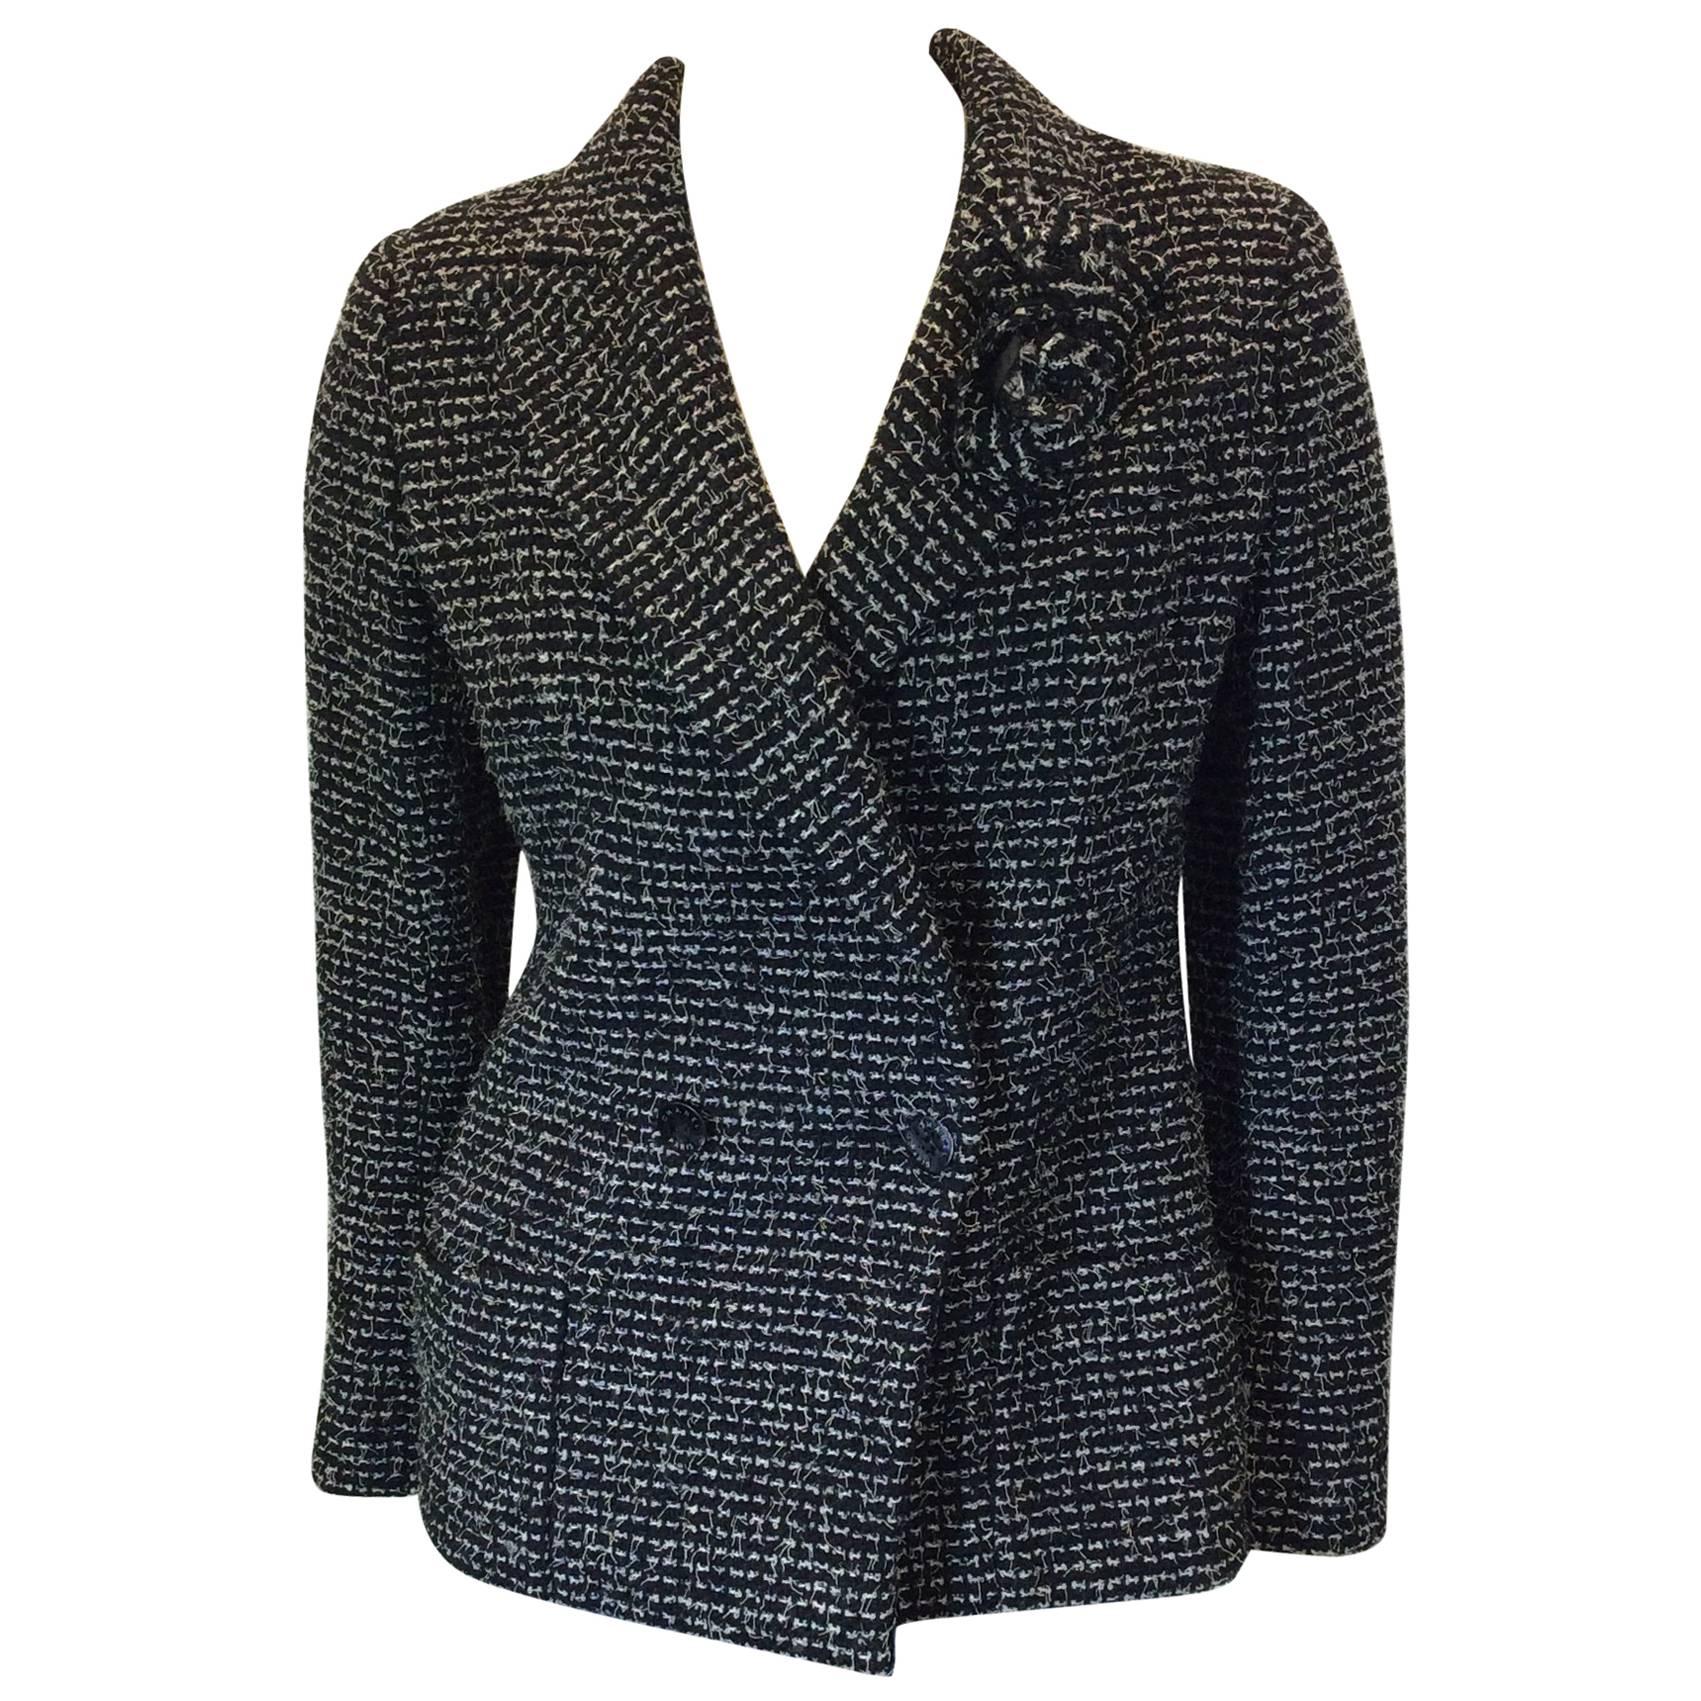 Chanel Black and White Sequined Tweed Jacket with Florettes For Sale